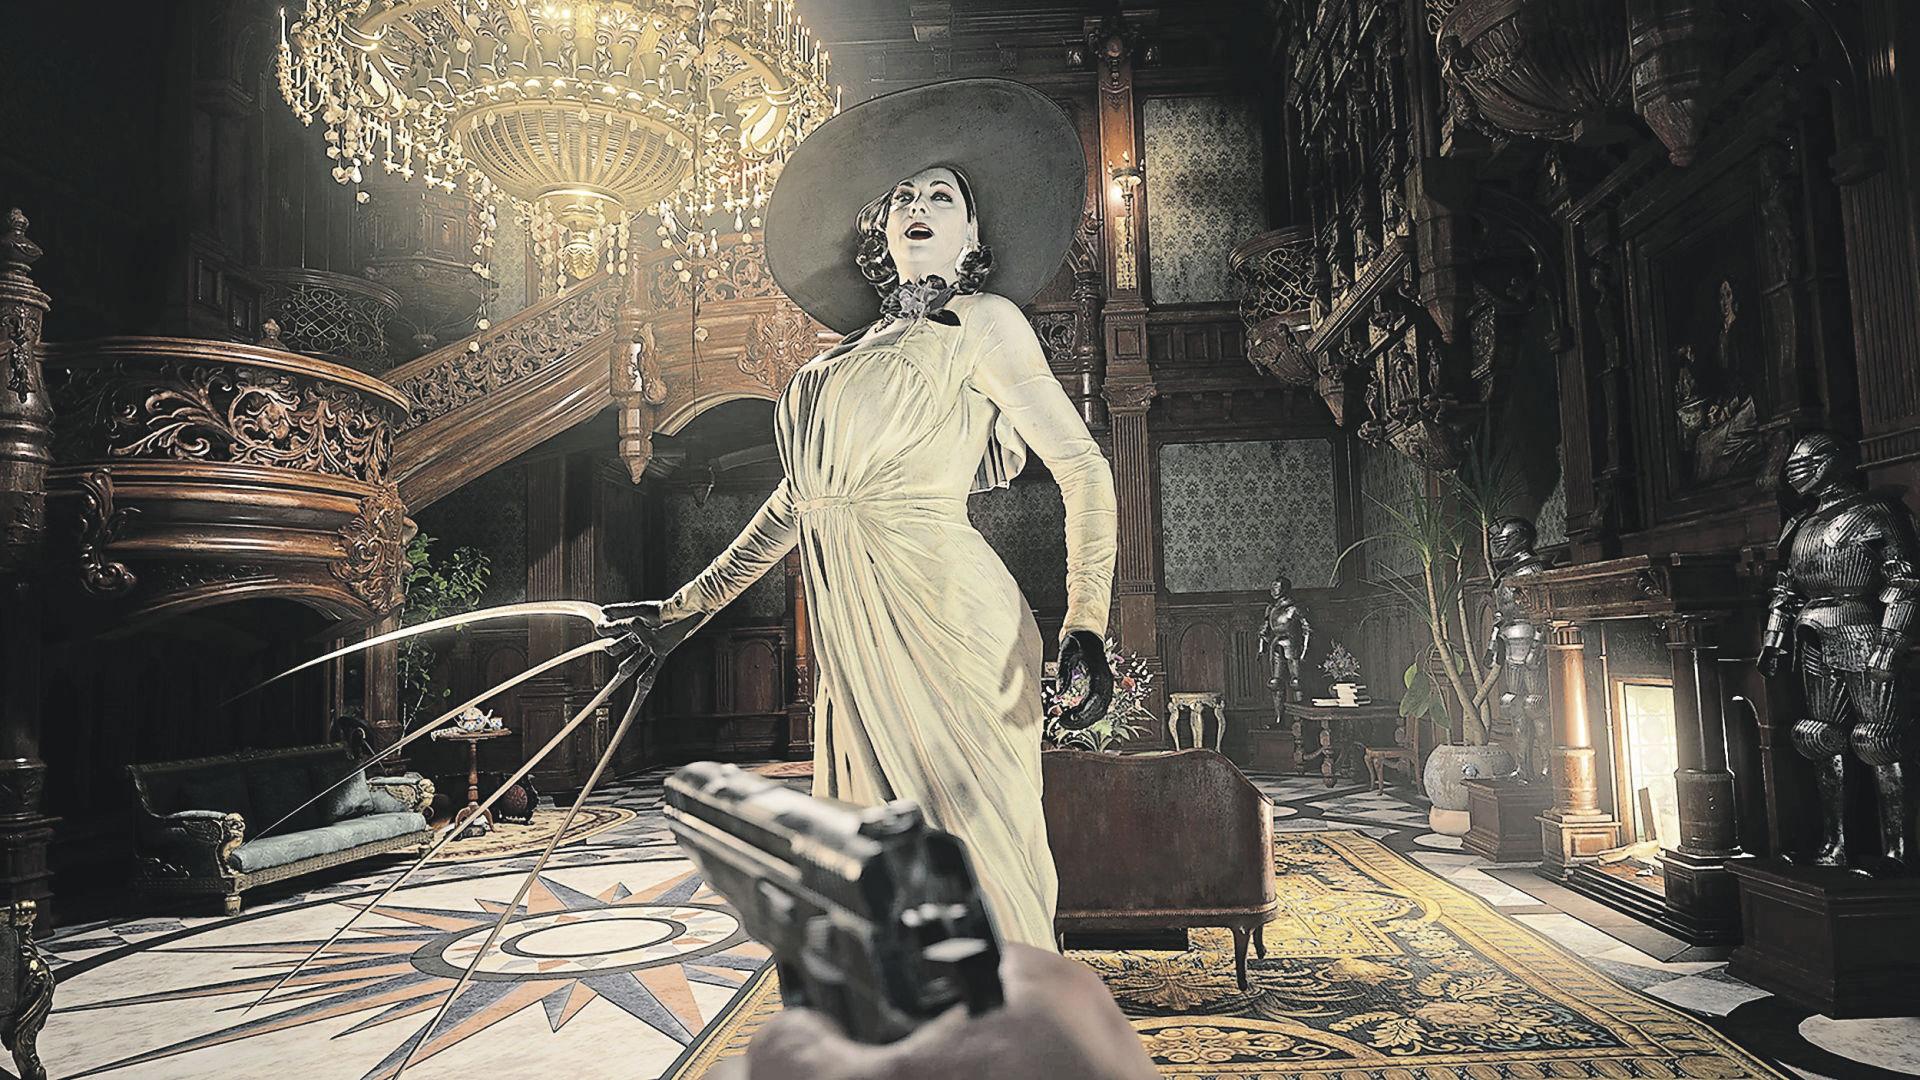 Can you get back into Castle Dimitrescu in Resident Evil Village?